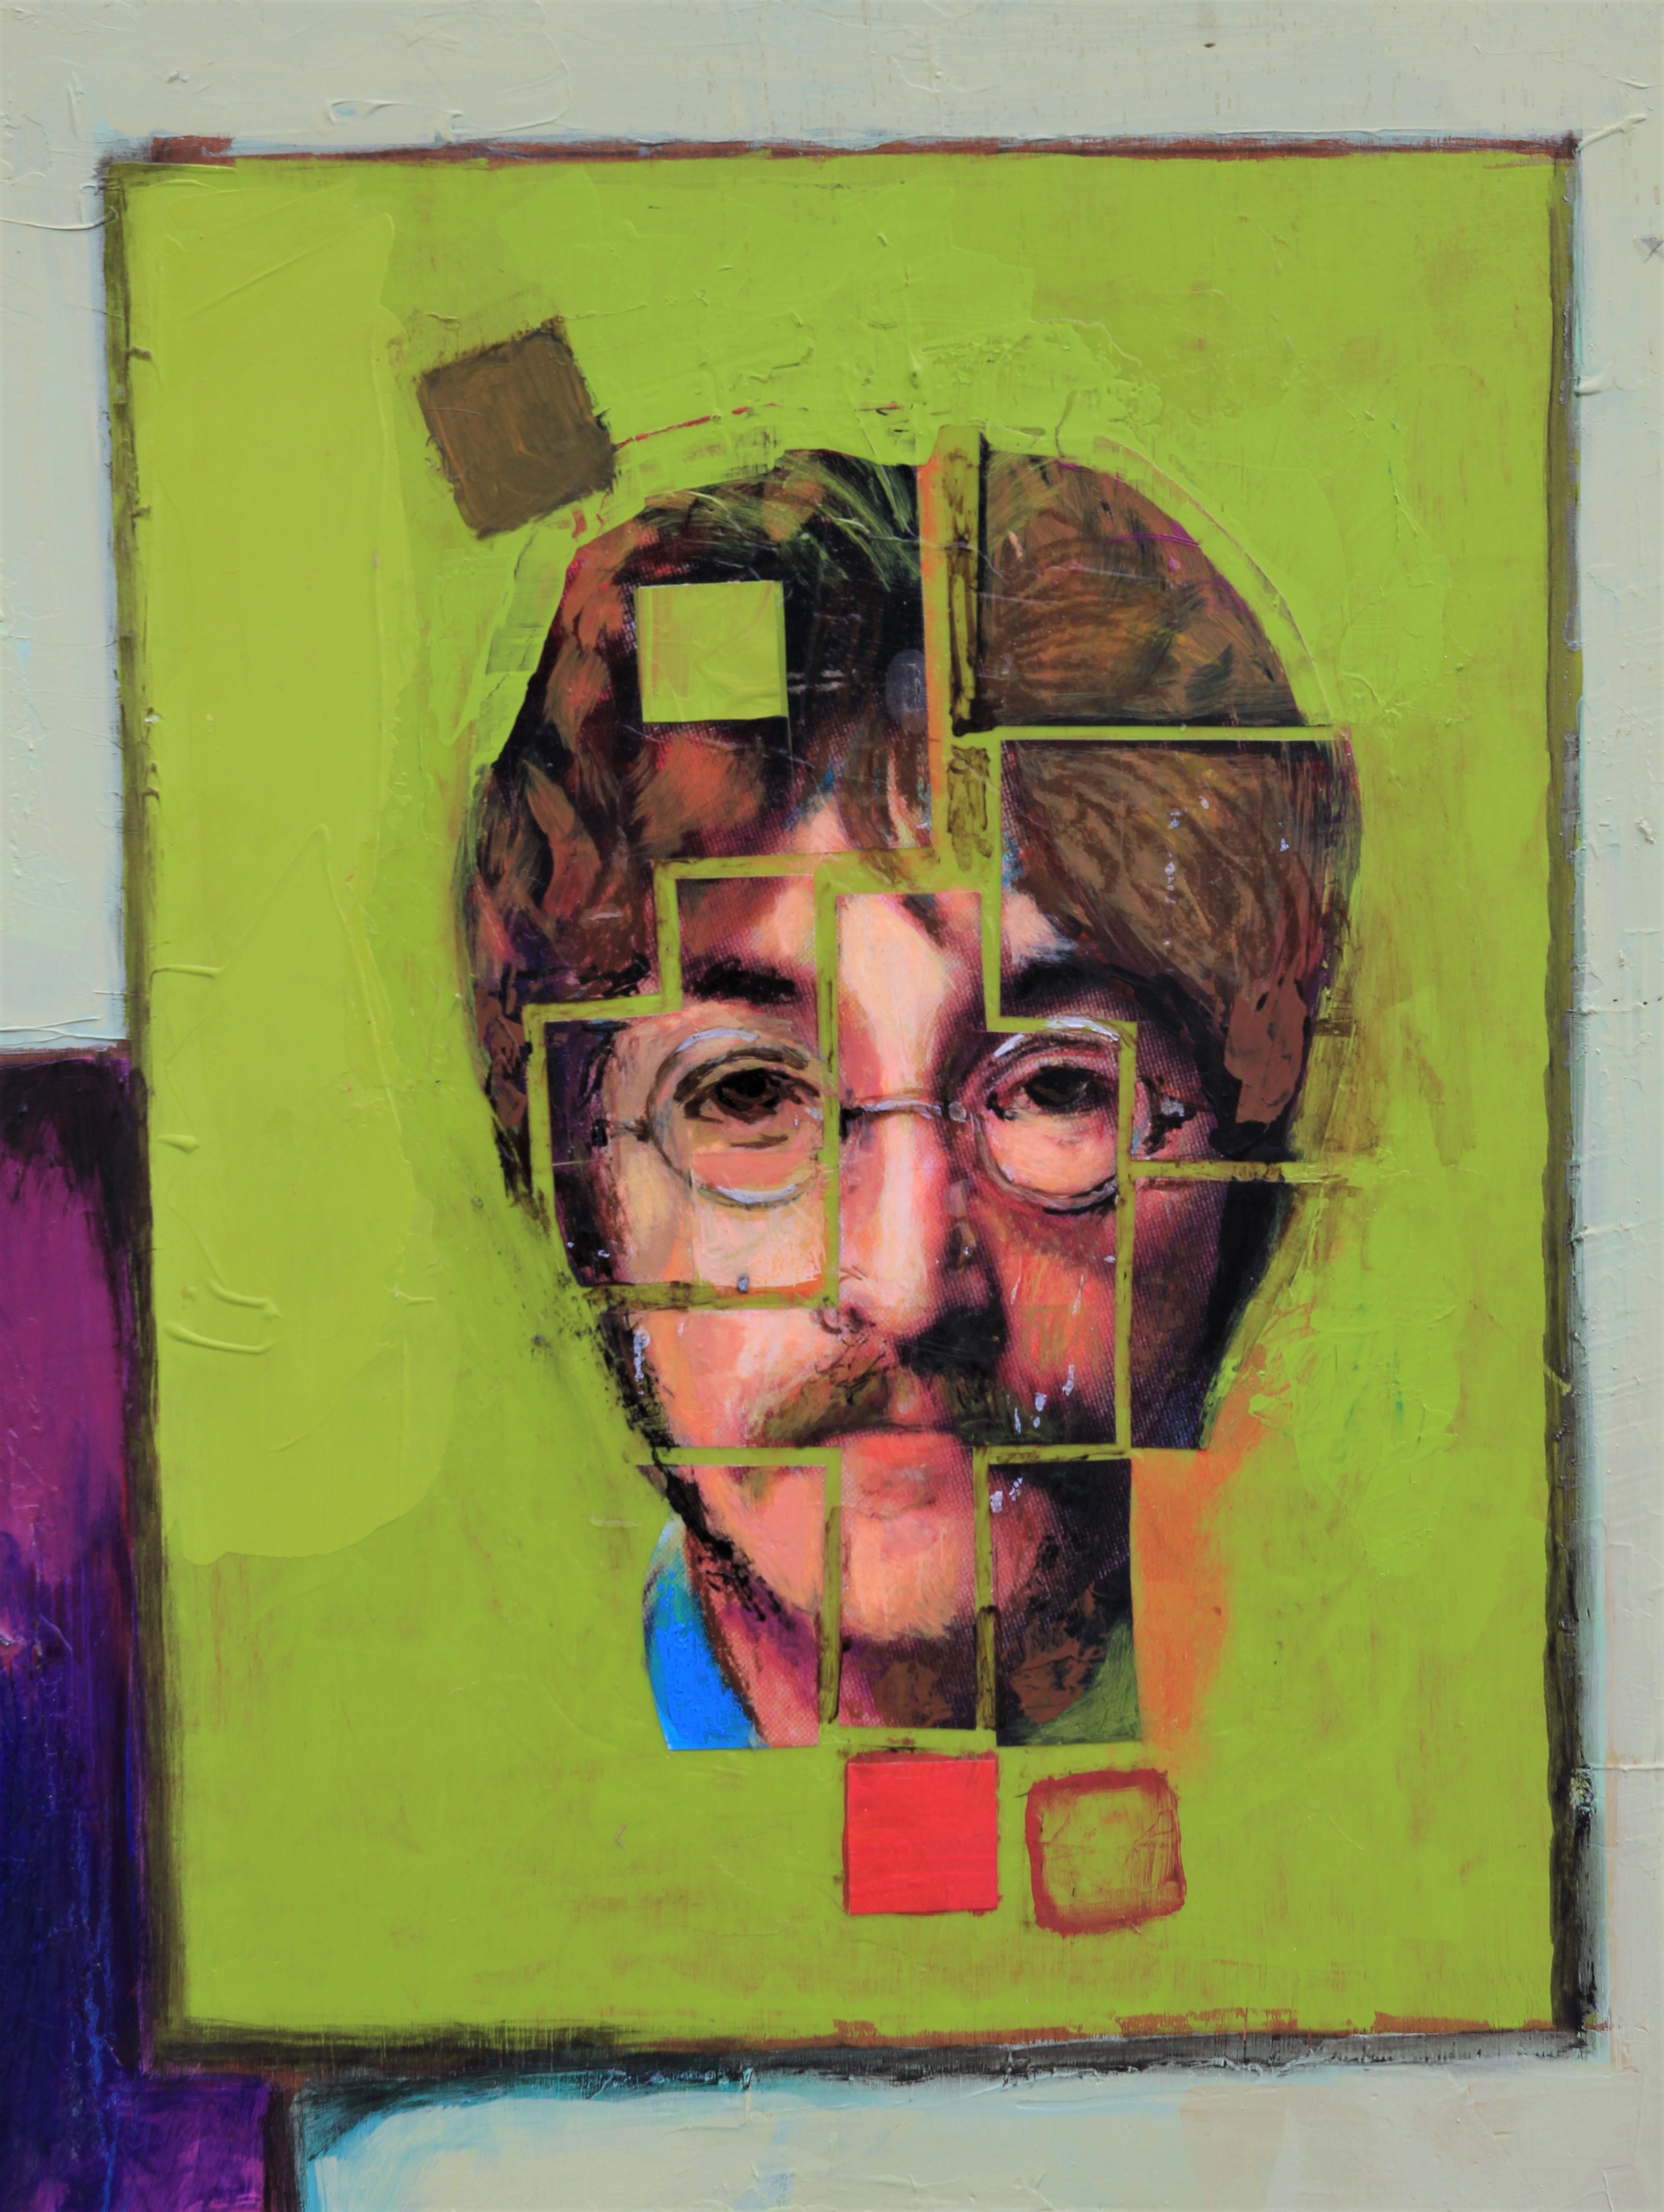 Abstract modern painting by Houston, Texas modernist sculptor and painter David Adickes. Mixed media painting depicting The Beatles' individual portraits on colorful geometric shapes against a green pastel background with a cut-out of John Lennon